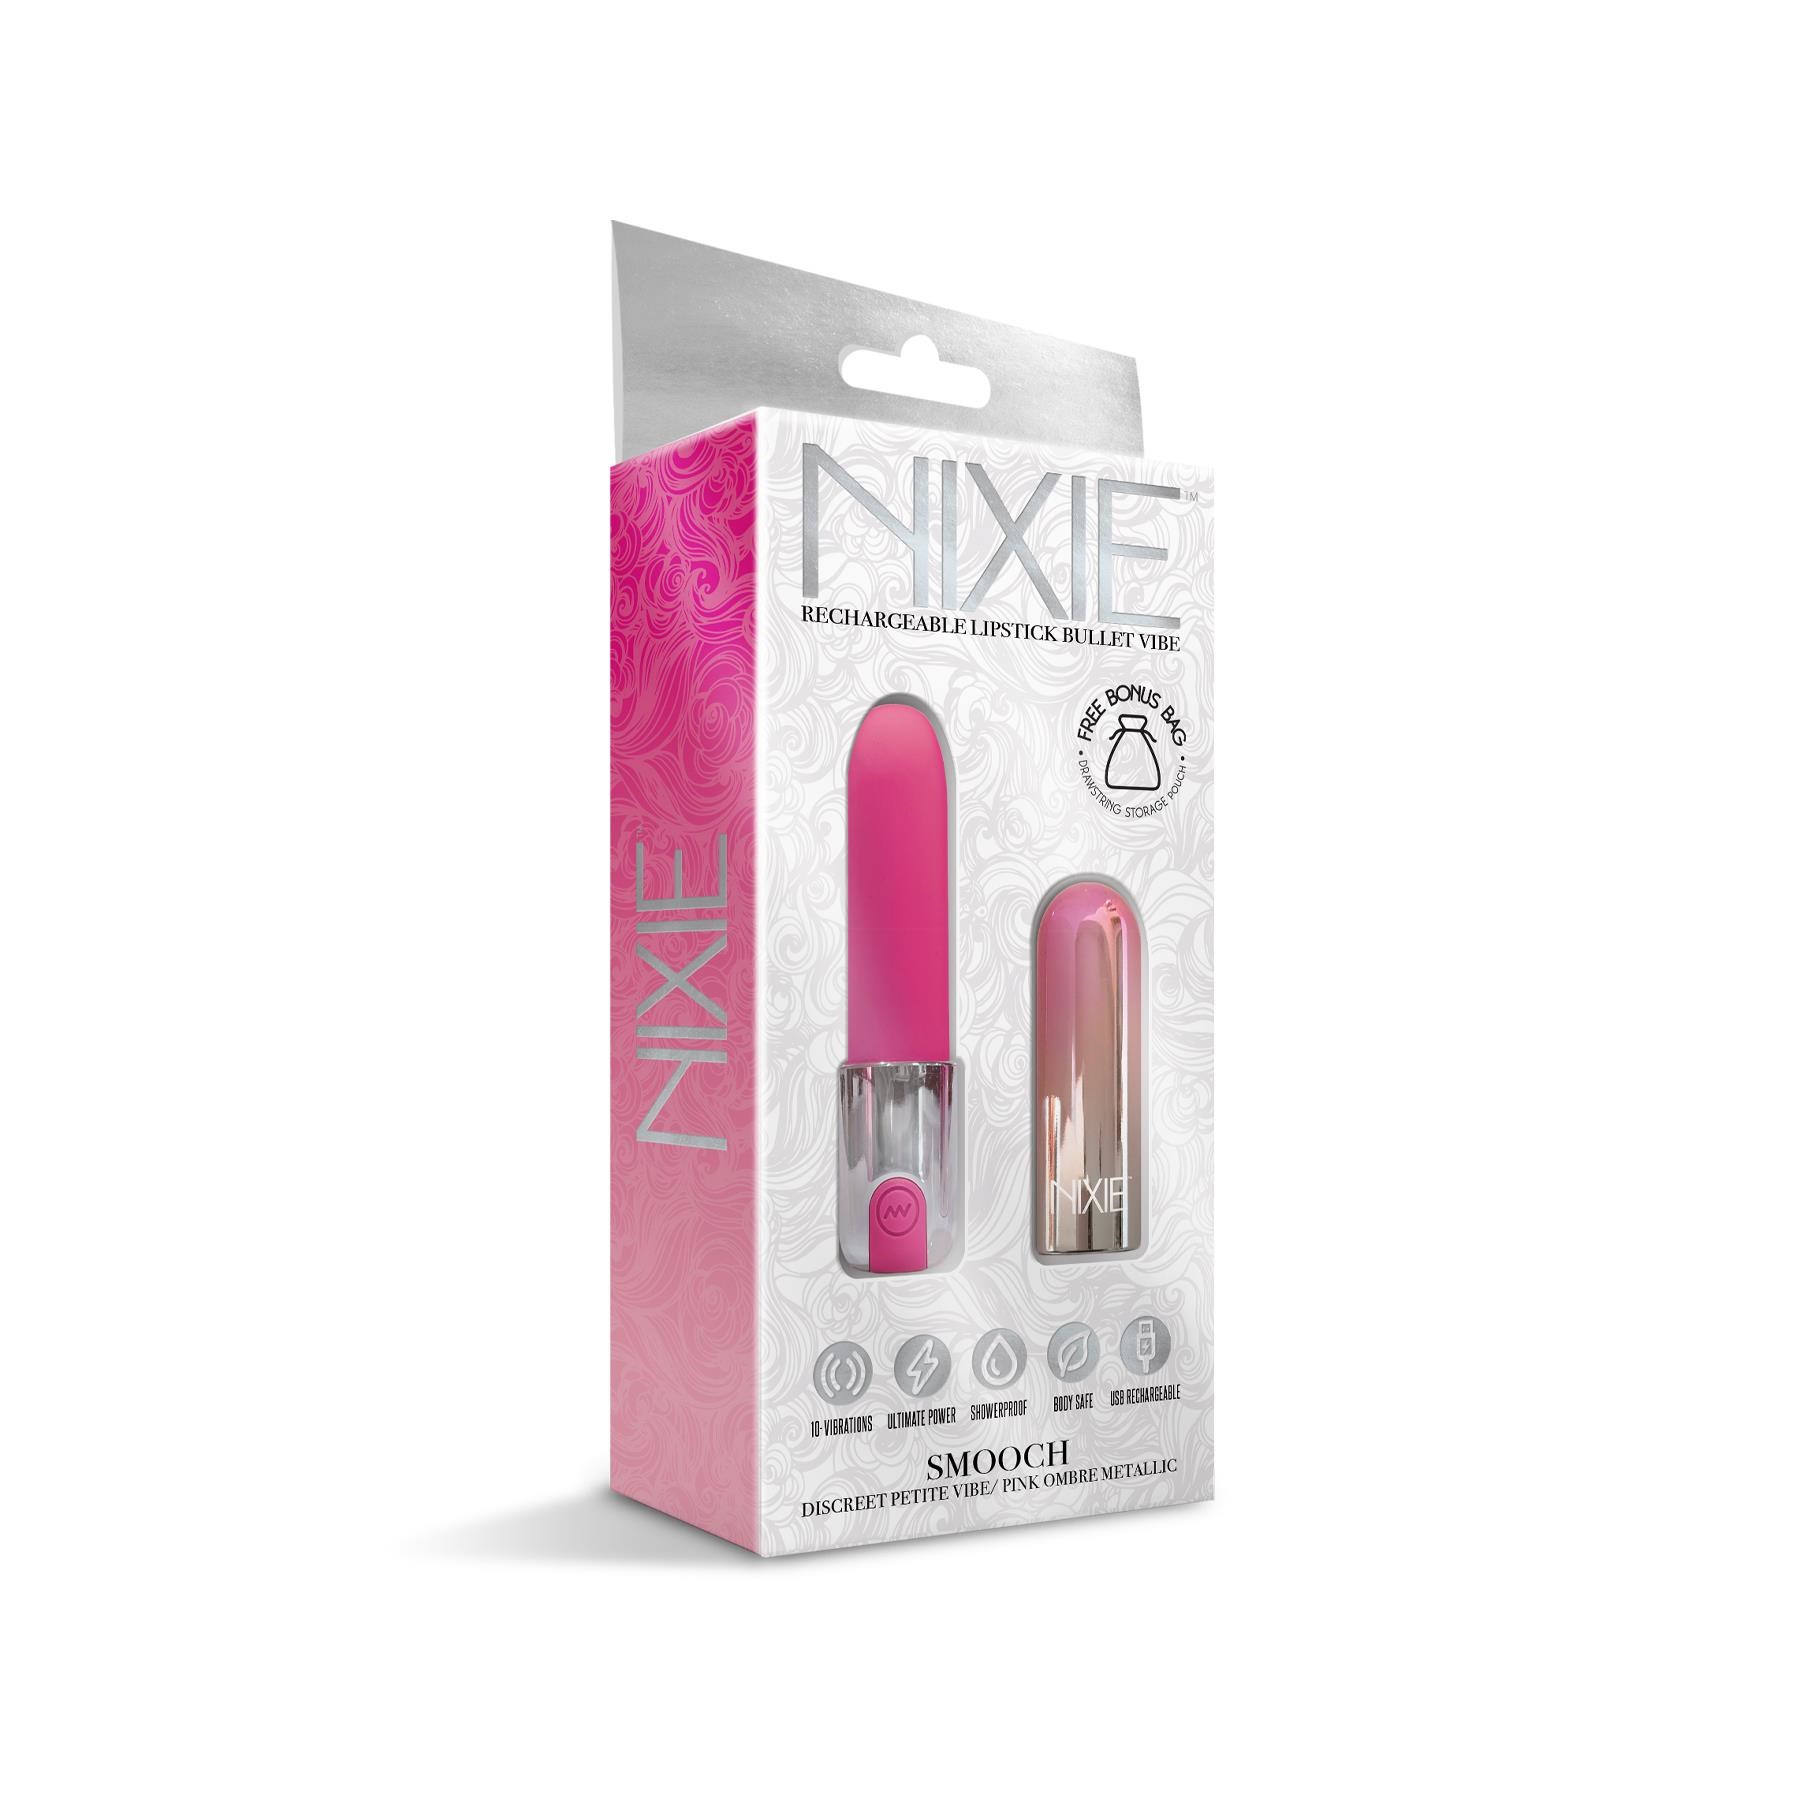 Nixie Smooch Rechargeable Lipstick Bullet - Packaging Shot